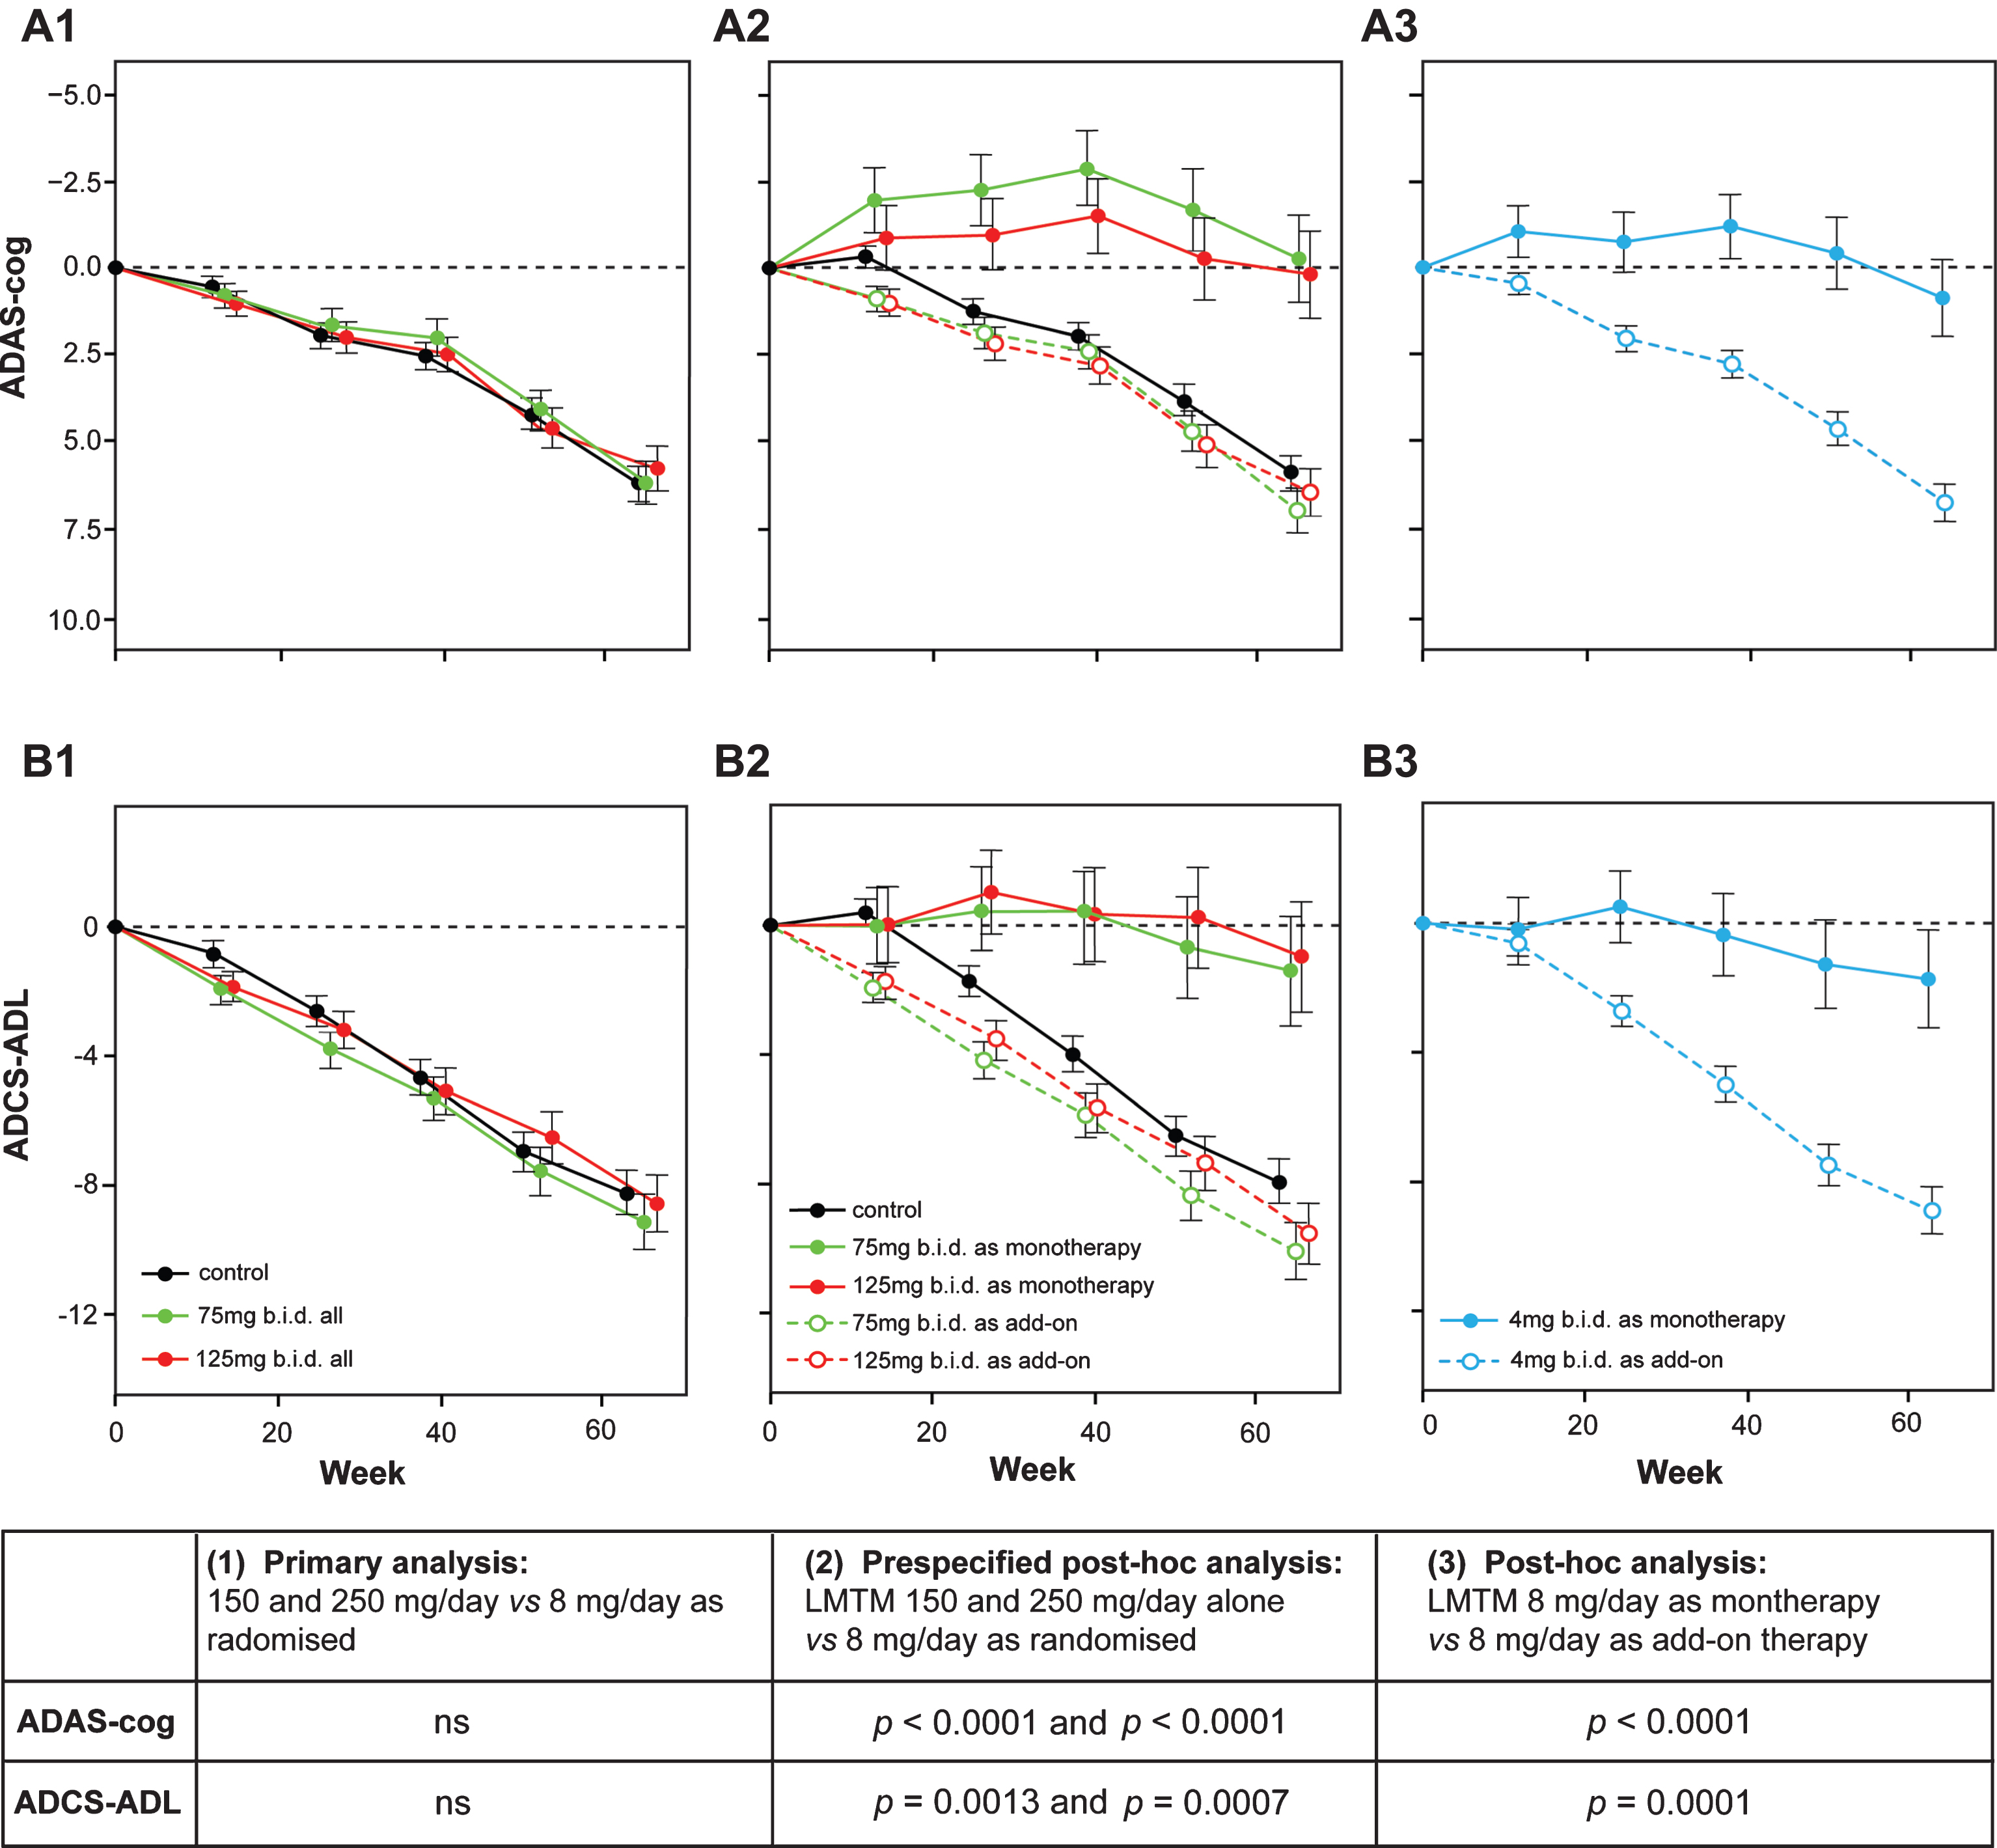 Change from baseline in ADAS-cog and ADCS-ADL for Study 015. The results are shown for the as-randomized primary analysis with AD co-medication status as an additive term in the model (A1, B1), or prespecified repeat of primary analysis with AD-co-medication status as an interaction term in the model showing effect of LMTM treatment as either monotherapy or as add-on to existing AD treatments (A2, B2). A post-hoc analysis is shown for low dose (8 mg/day) with LMTM given as monotherapy or as add-on (A3, B3). ns, not significant. Source: Adapted from Gauthier et al., Lancet 388, 2873-2884, 2016, with permission of Elsevier.